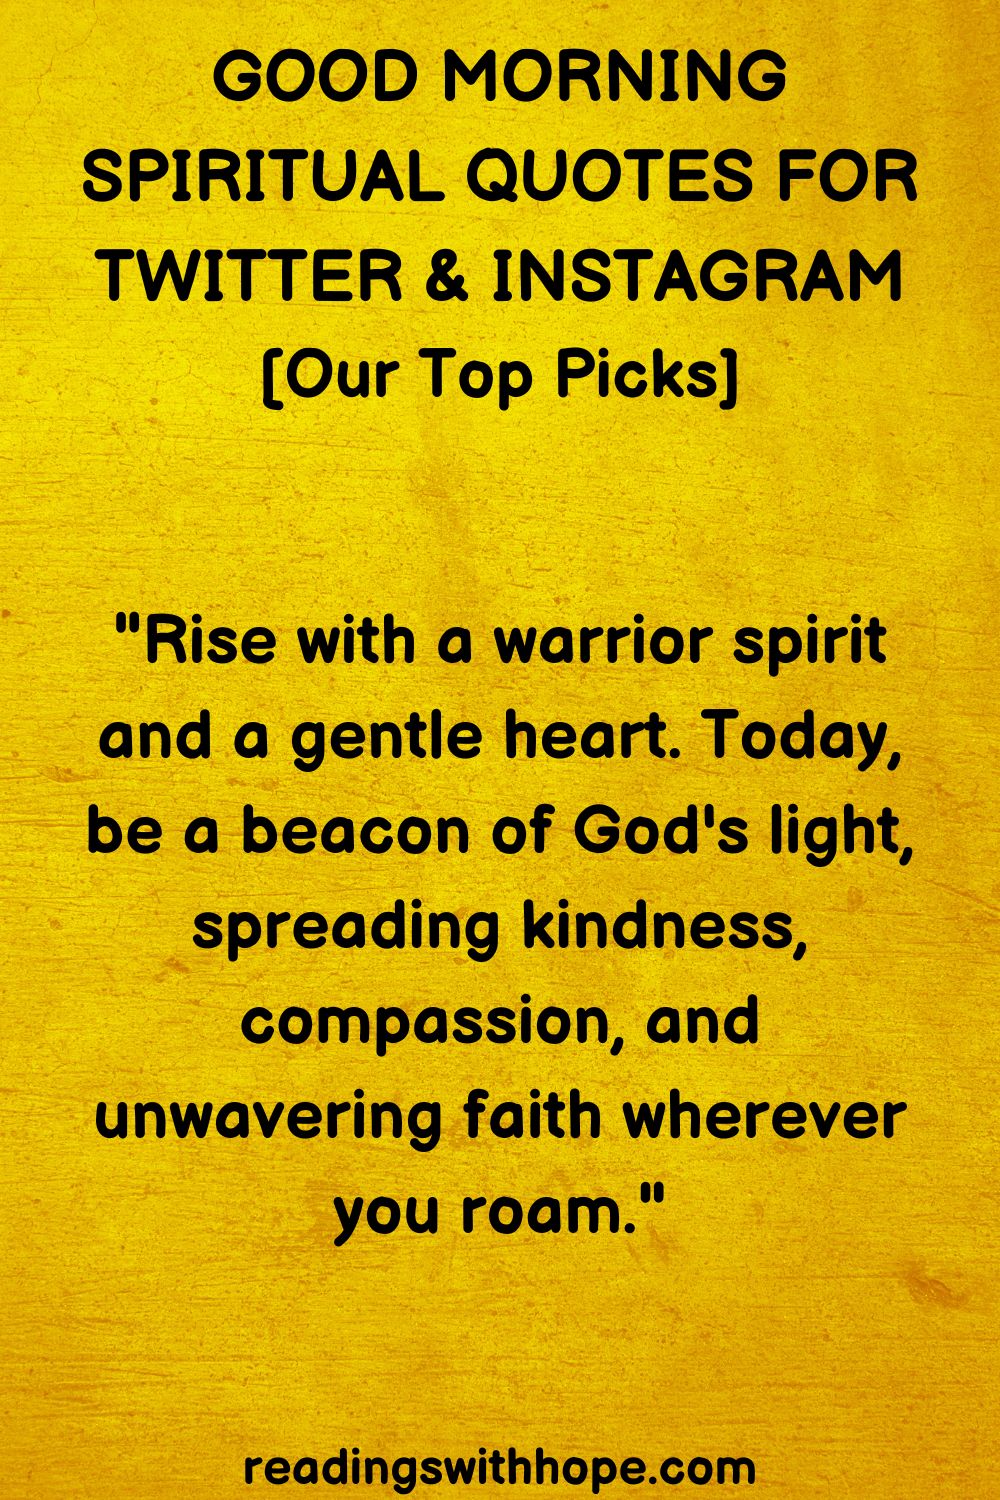 Good Morning Spiritual Quotes For Twitter and Instagram